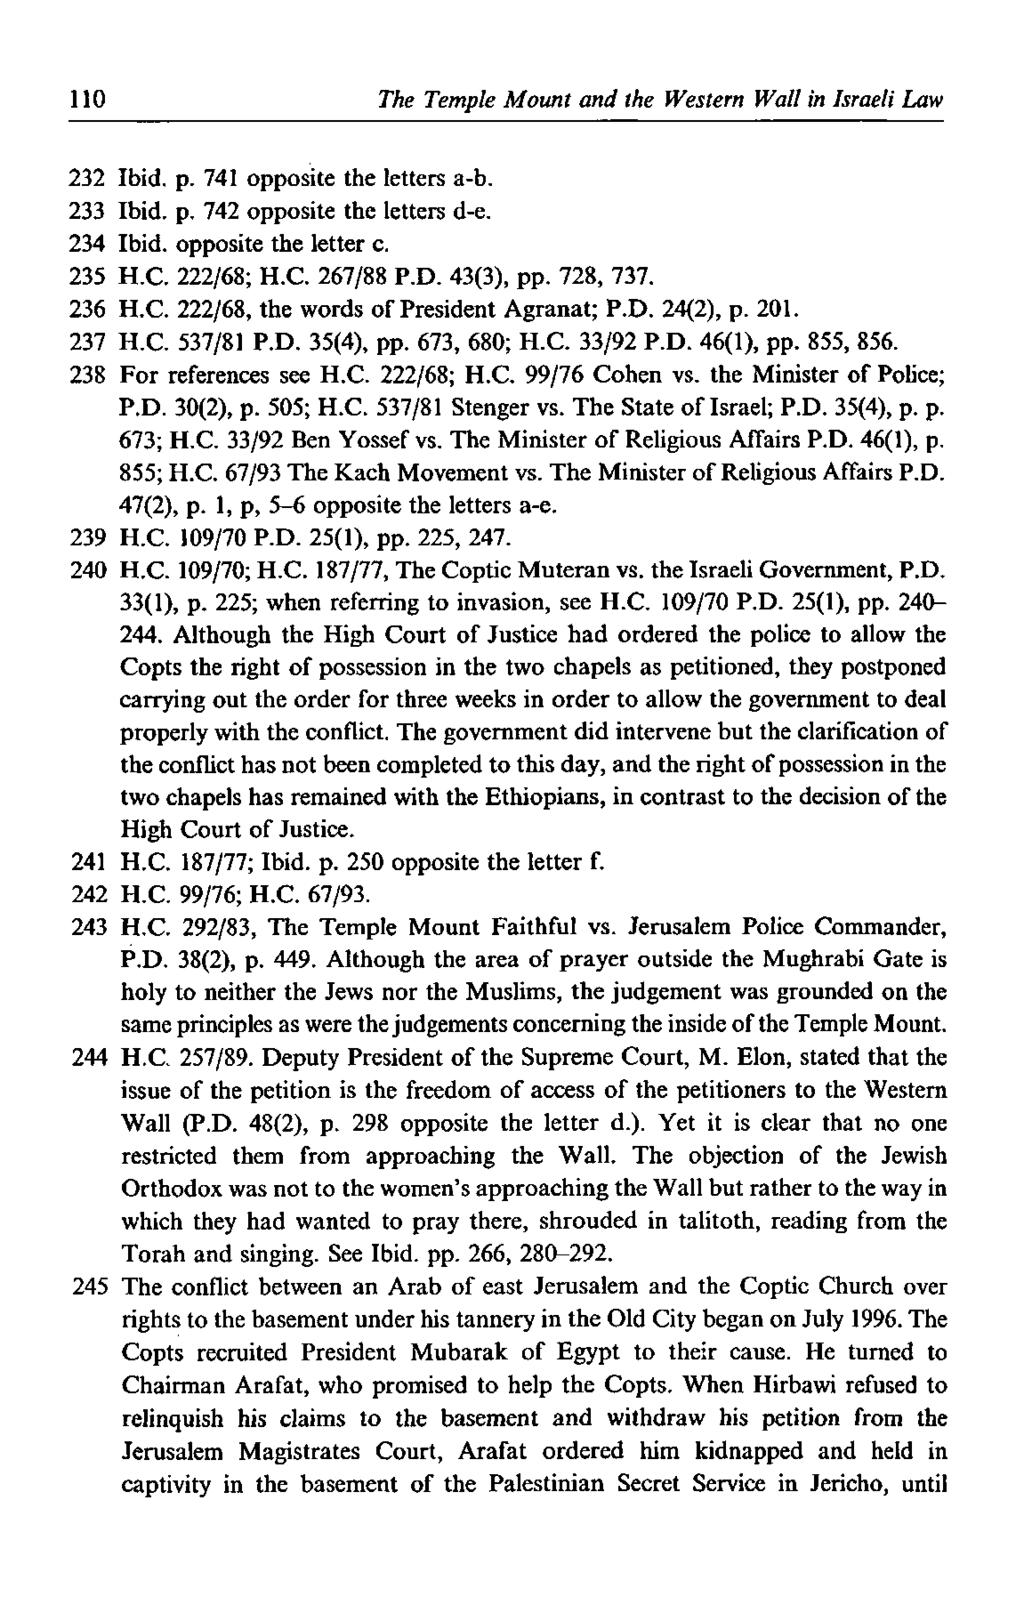 110 The Temple Mount and the Western Wall in Israeli Law 232 Ibid. p. 741 opposite the letters a-b. 233 Ibid. p. 742 opposite the letters d-e. 234 Ibid, opposite the letter c. 235 H.C. 222/68; H.C. 267/88 P.